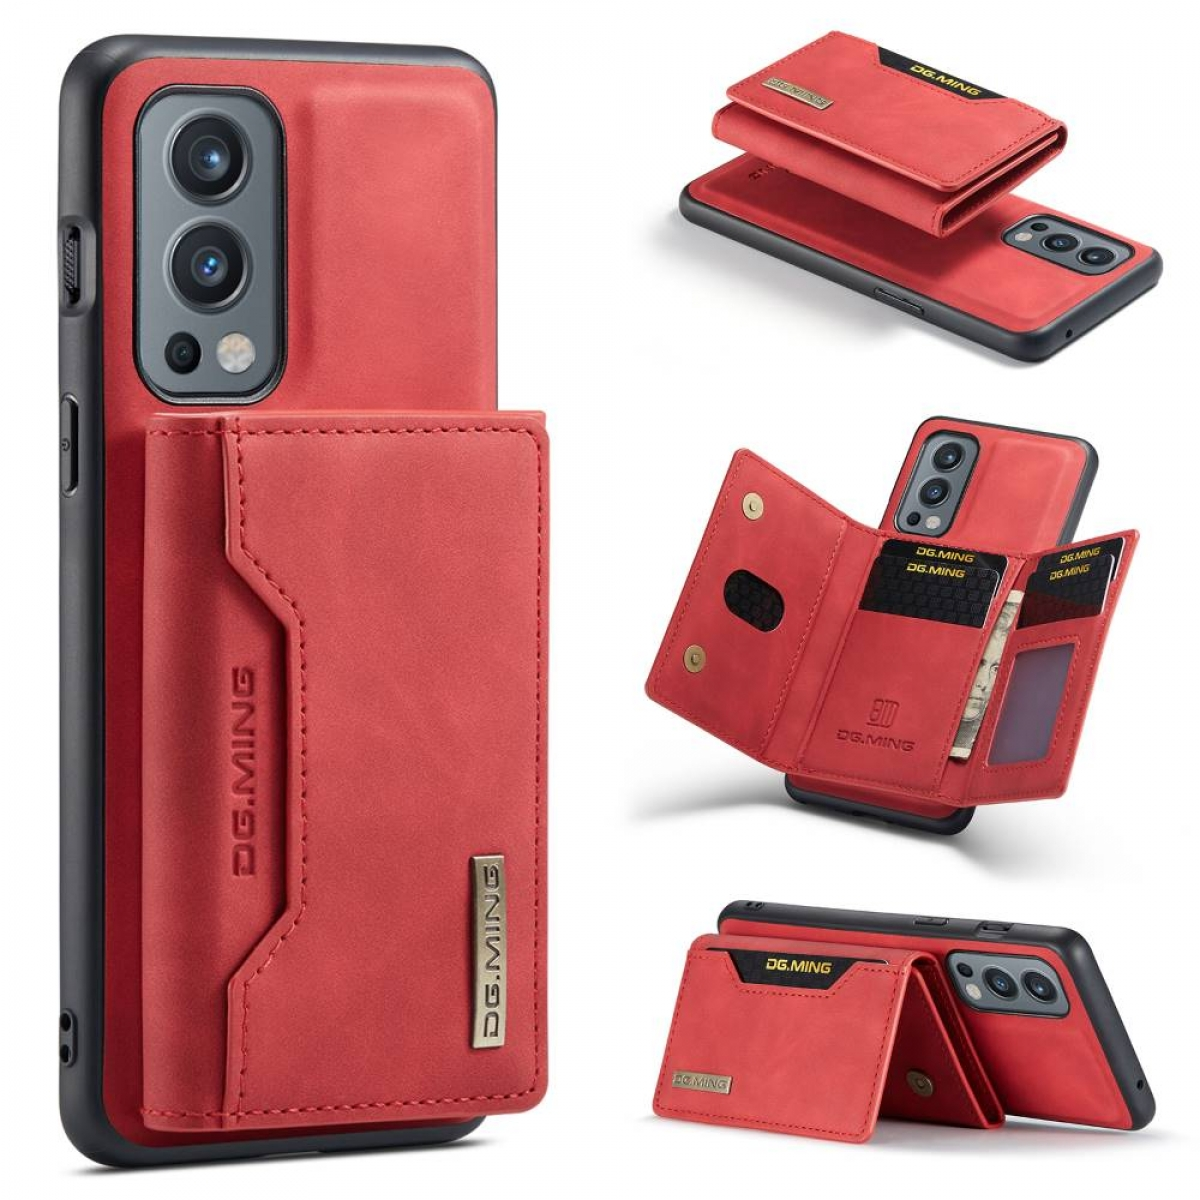 2 MING OnePlus, M2 5G, Backcover, Rot Nord 2in1, DG